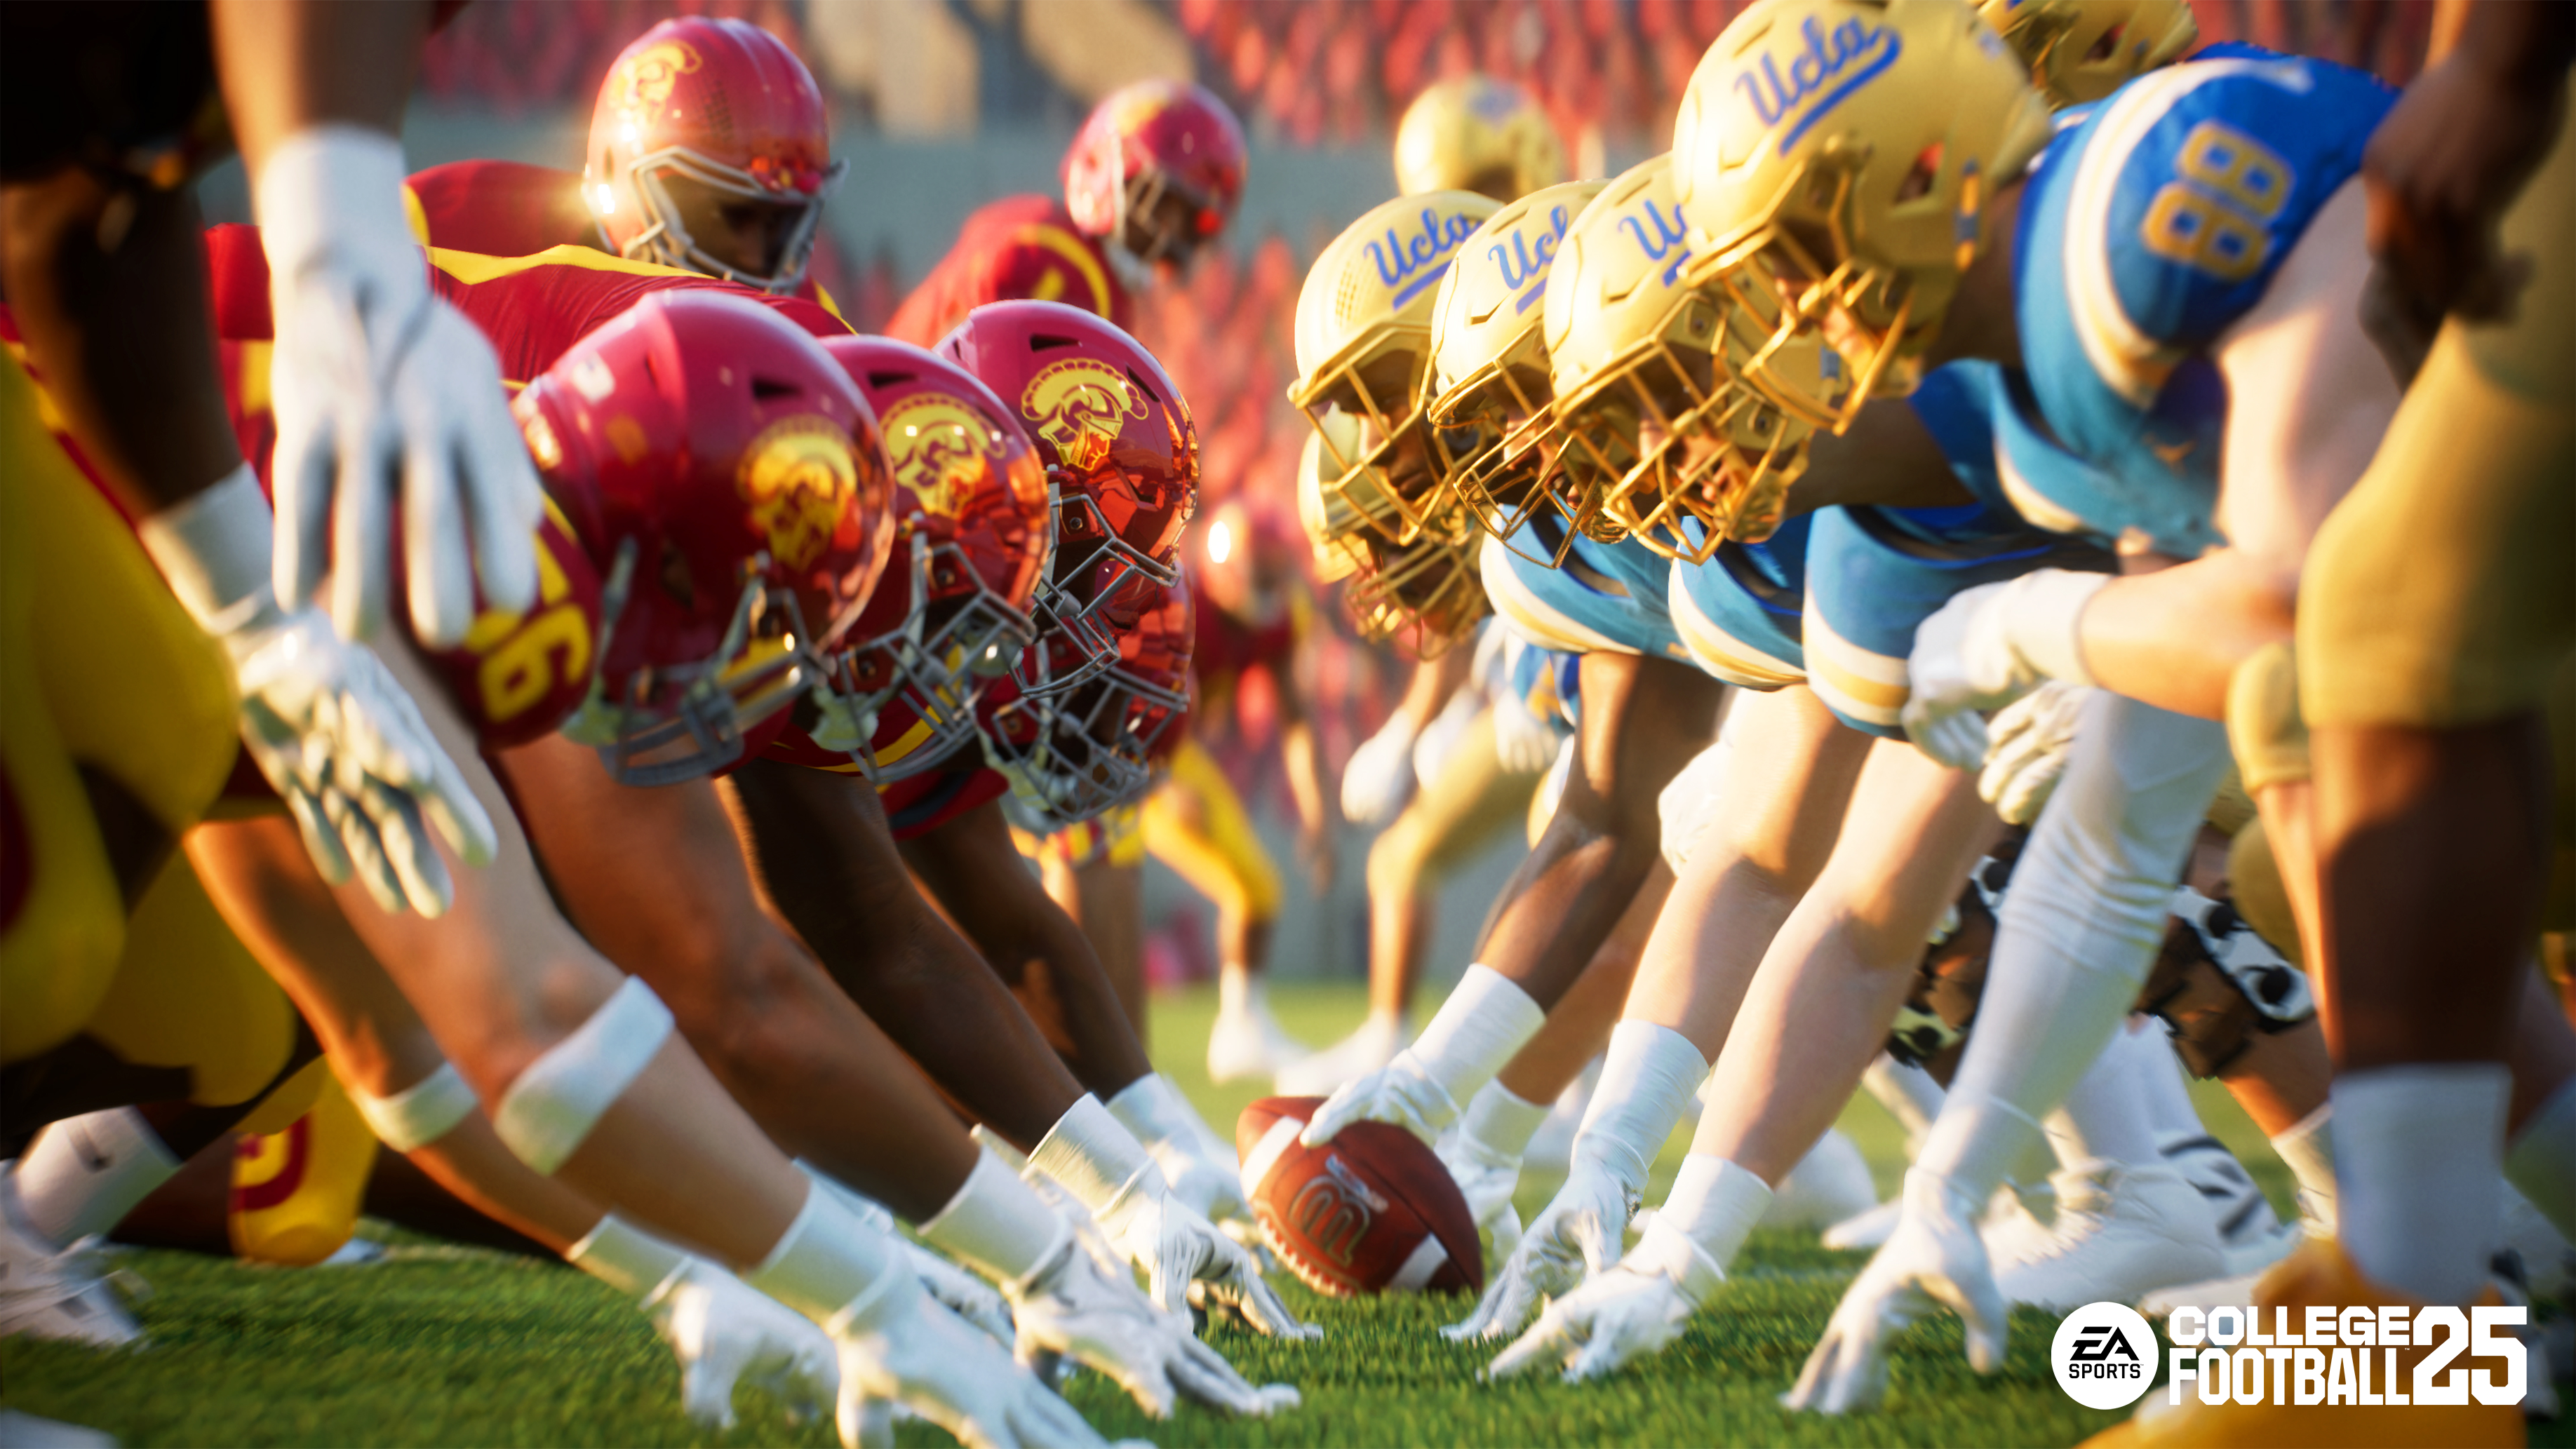 UCLA and USC face off in EA Sports College Football 25